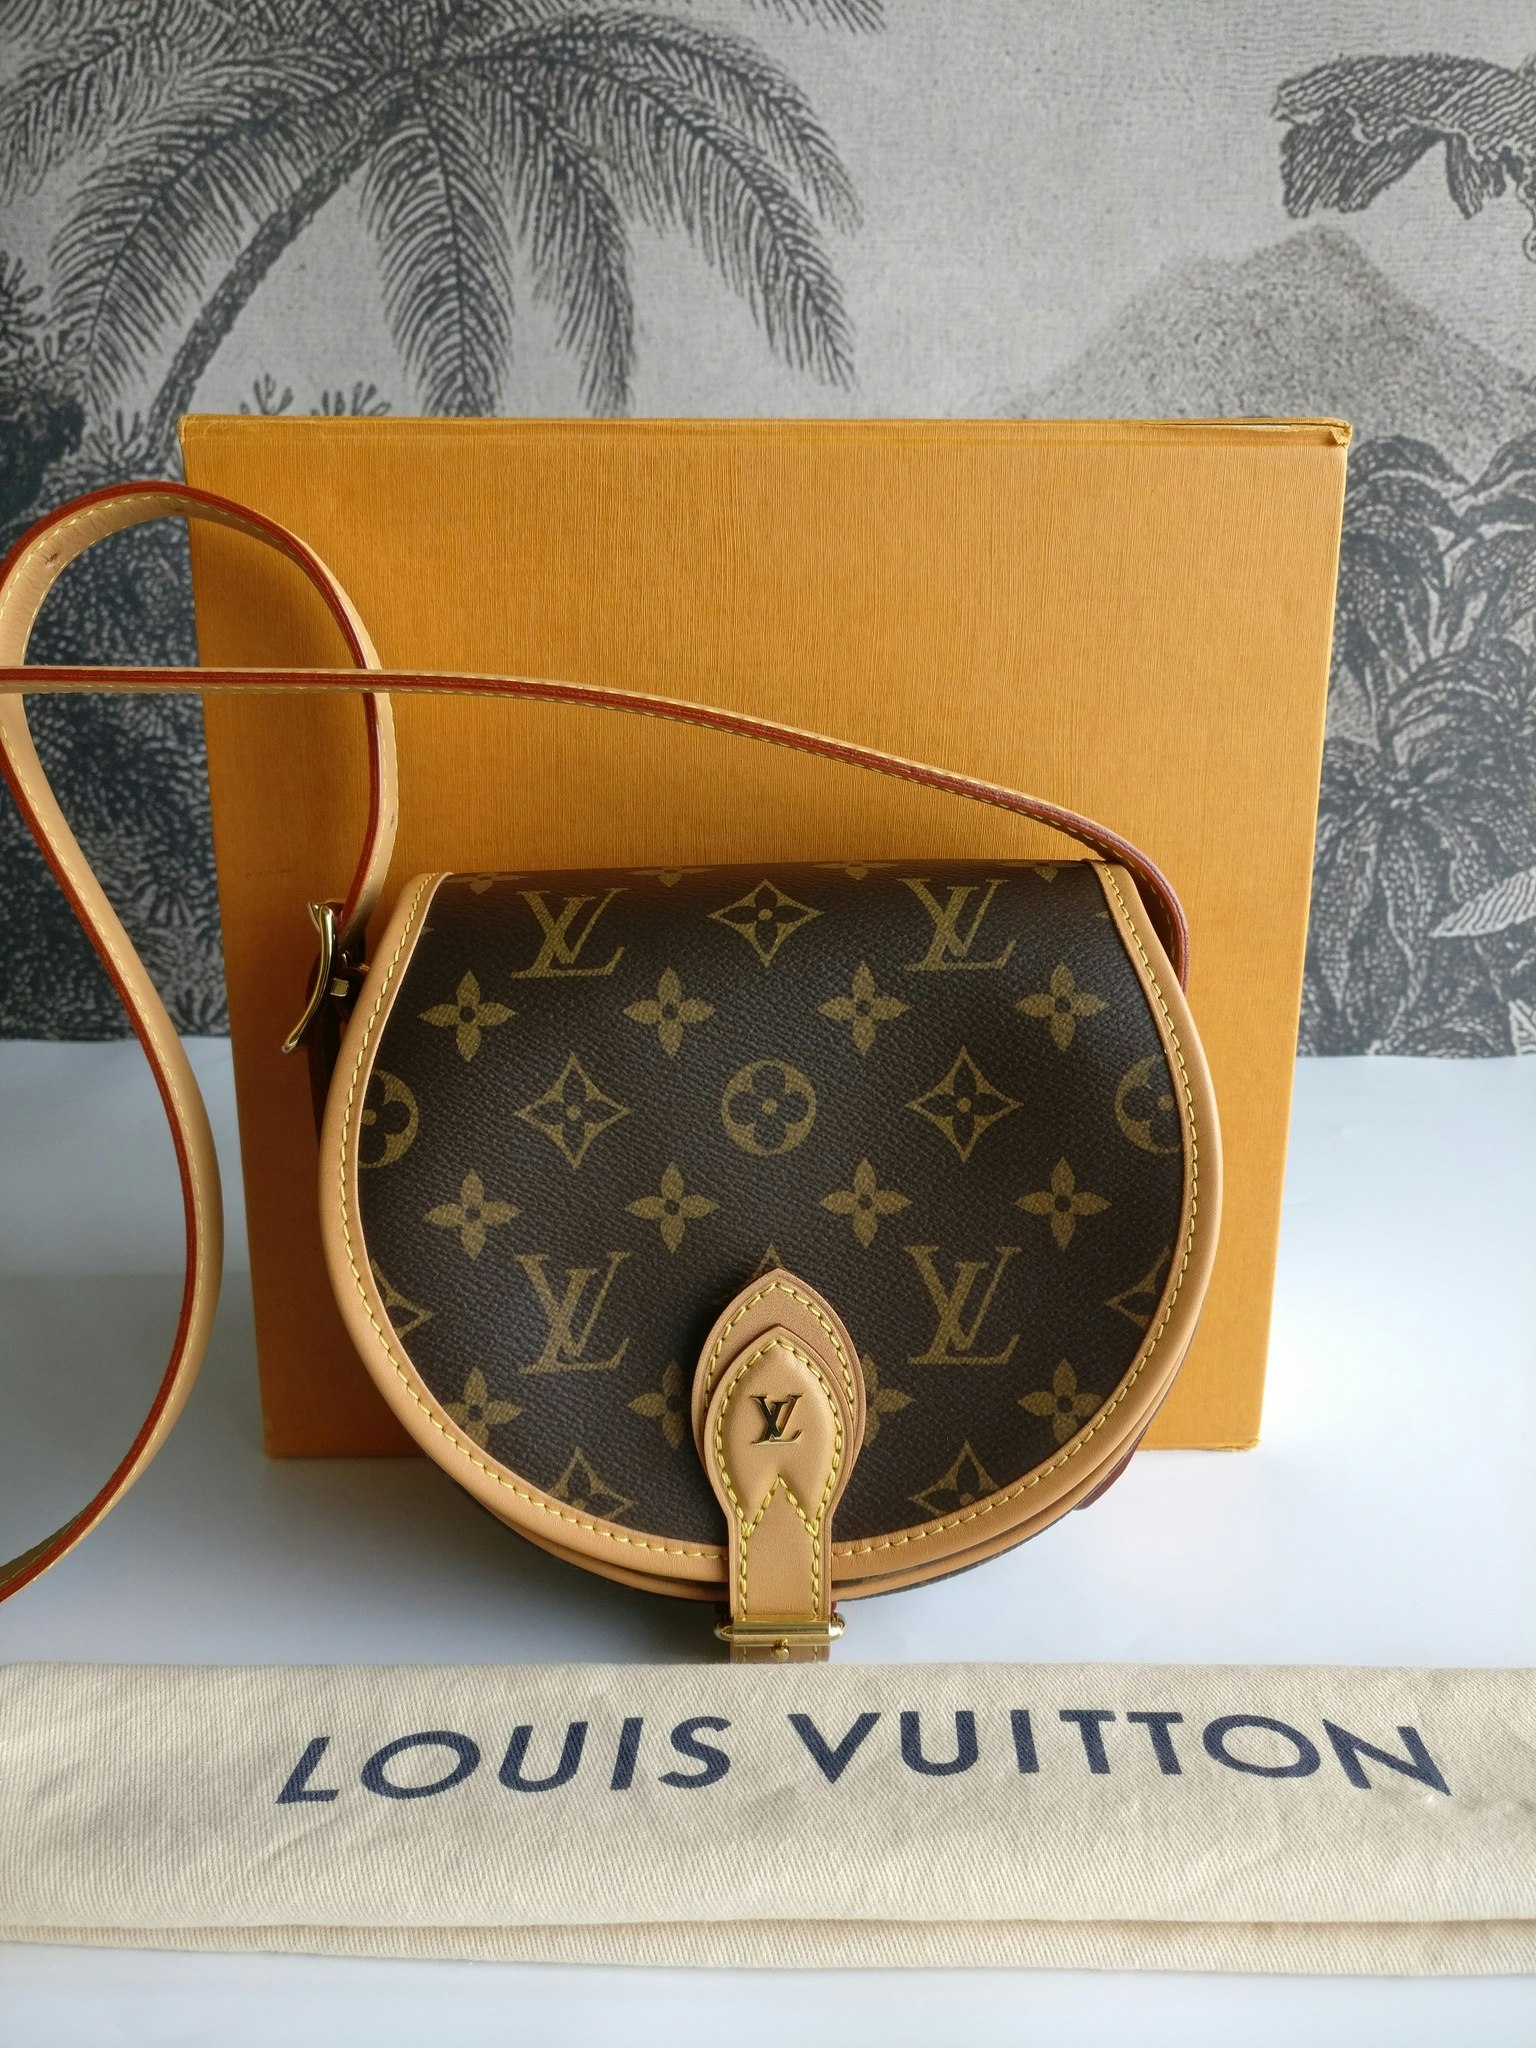 Bag of the Day 27: Louis Vuitton TAMBOURINE Monogram Bag What Fits